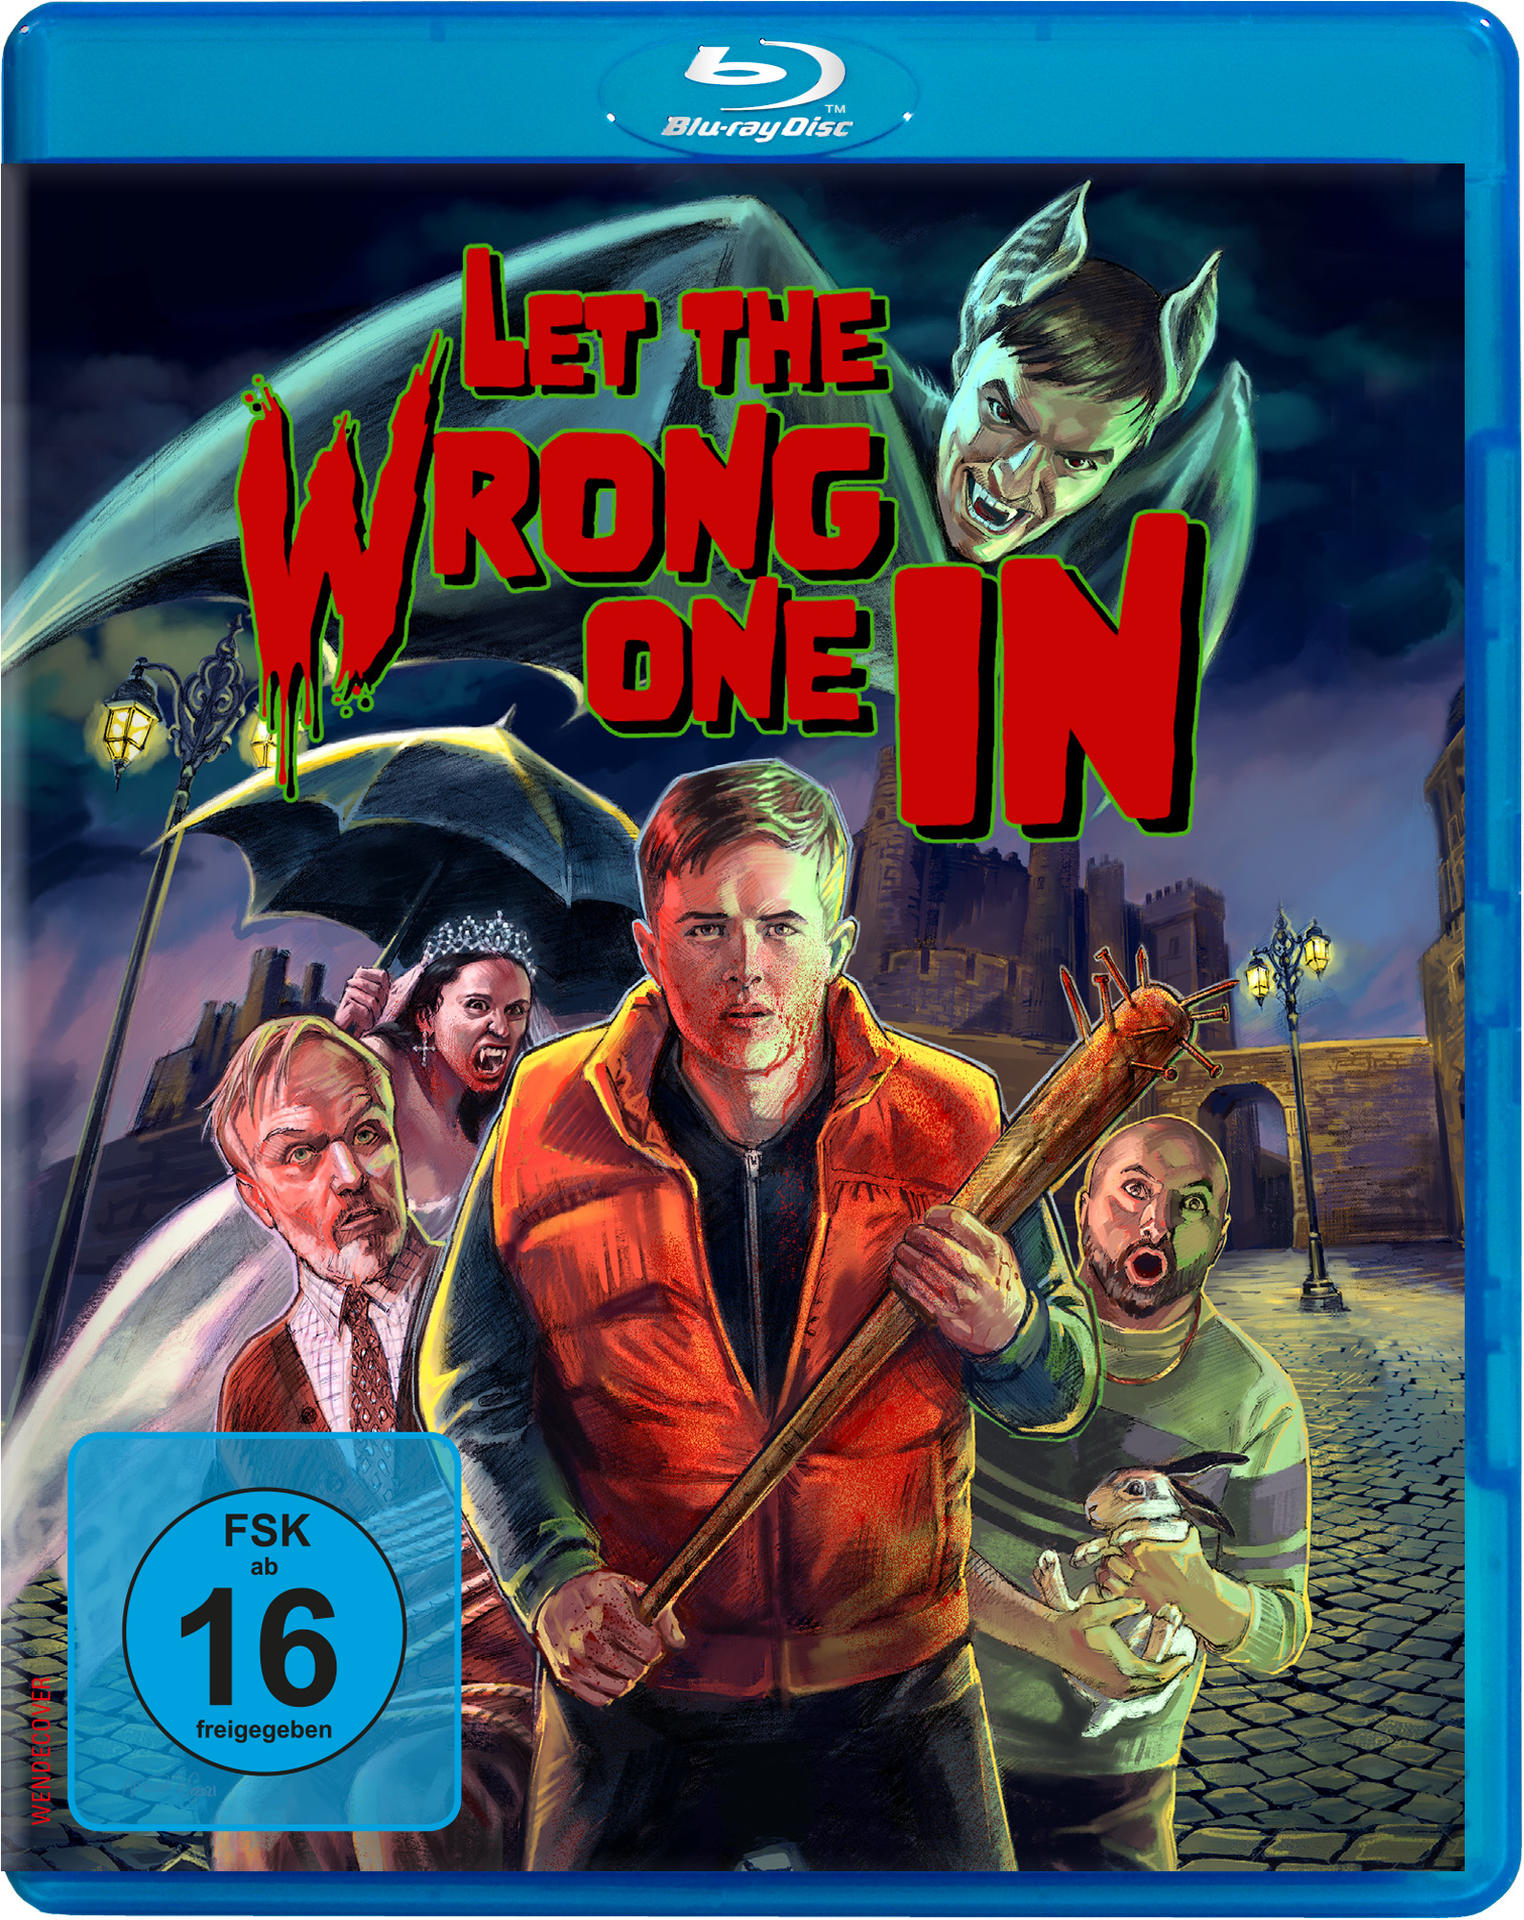 Let the wrong one in Blu-ray